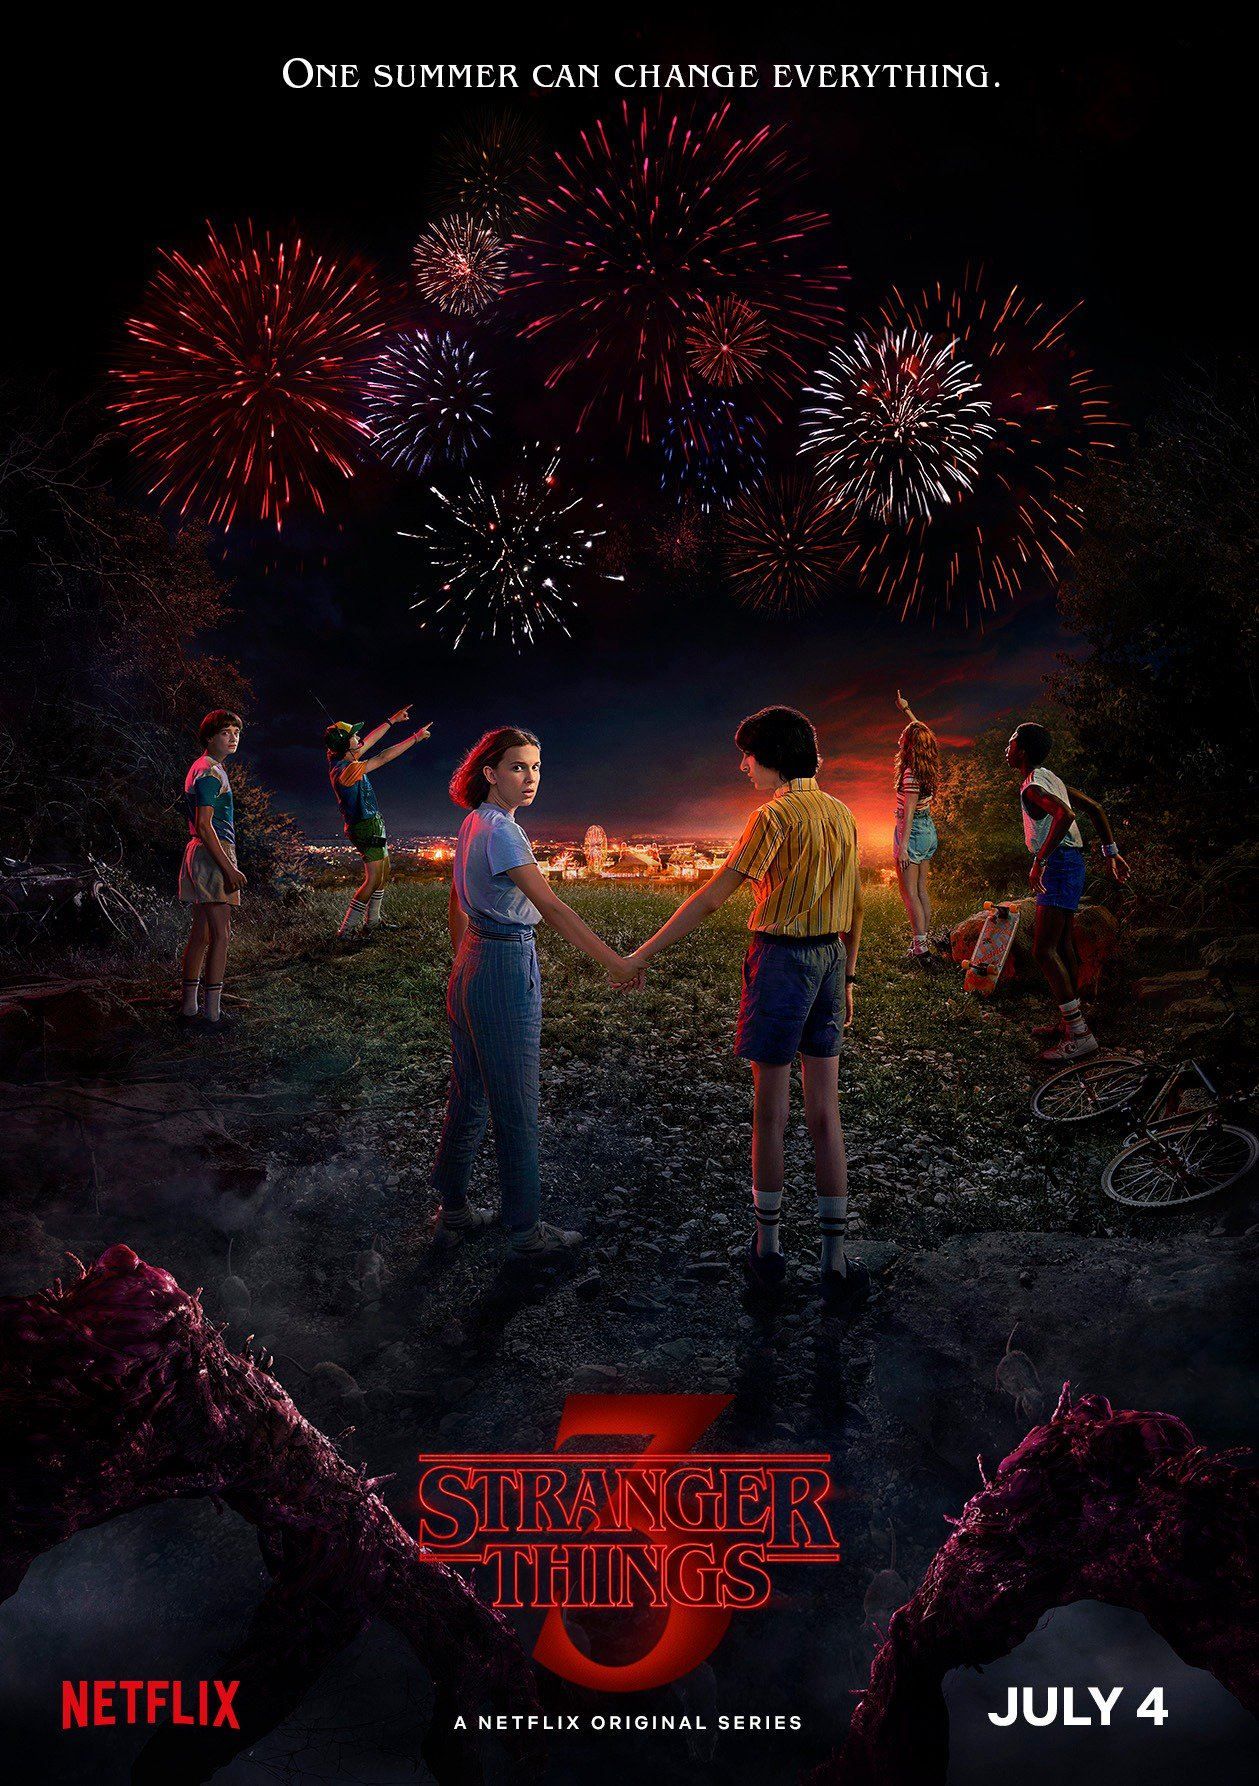 Stranger Things 3 Release Date Revealed, Coming July 2019